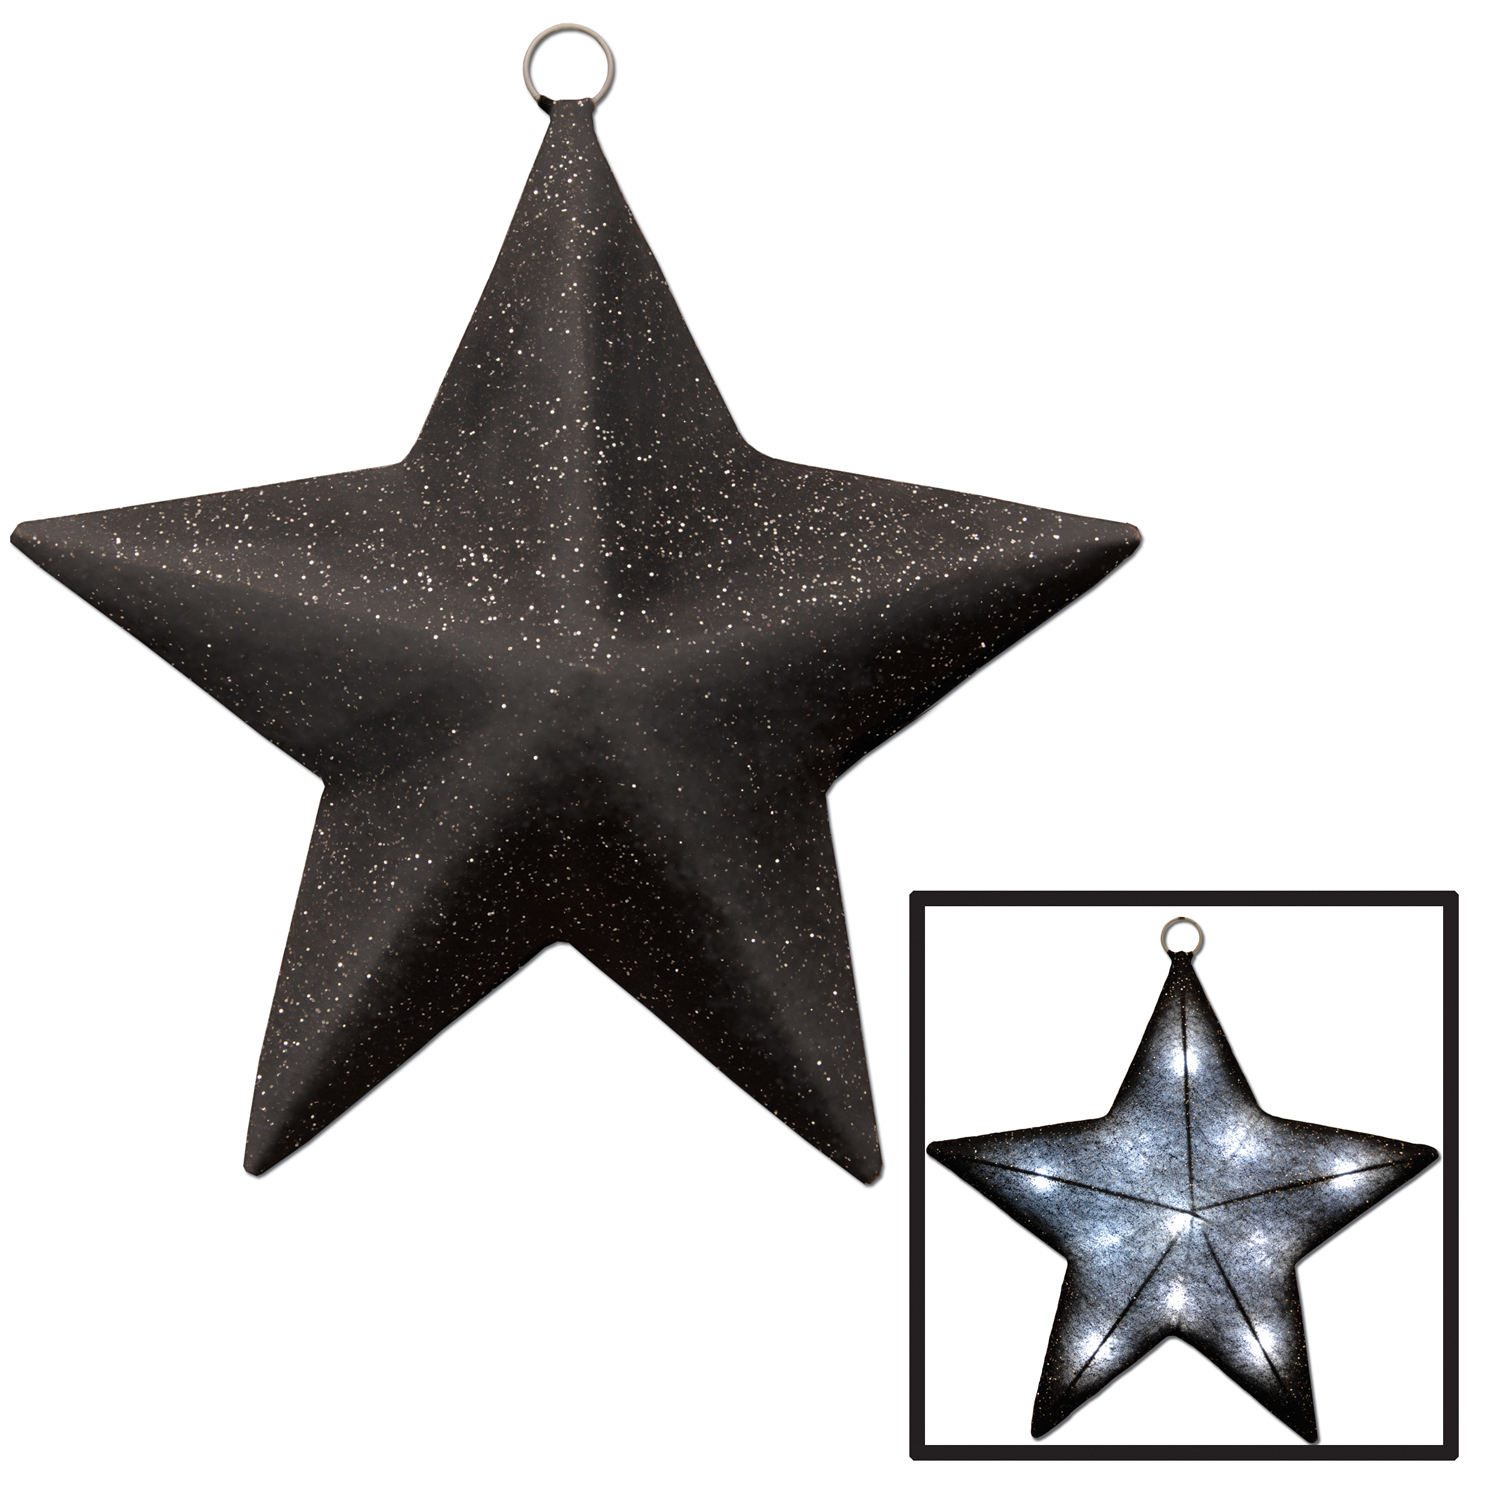 Hanging black star with light up function inside for a glow.